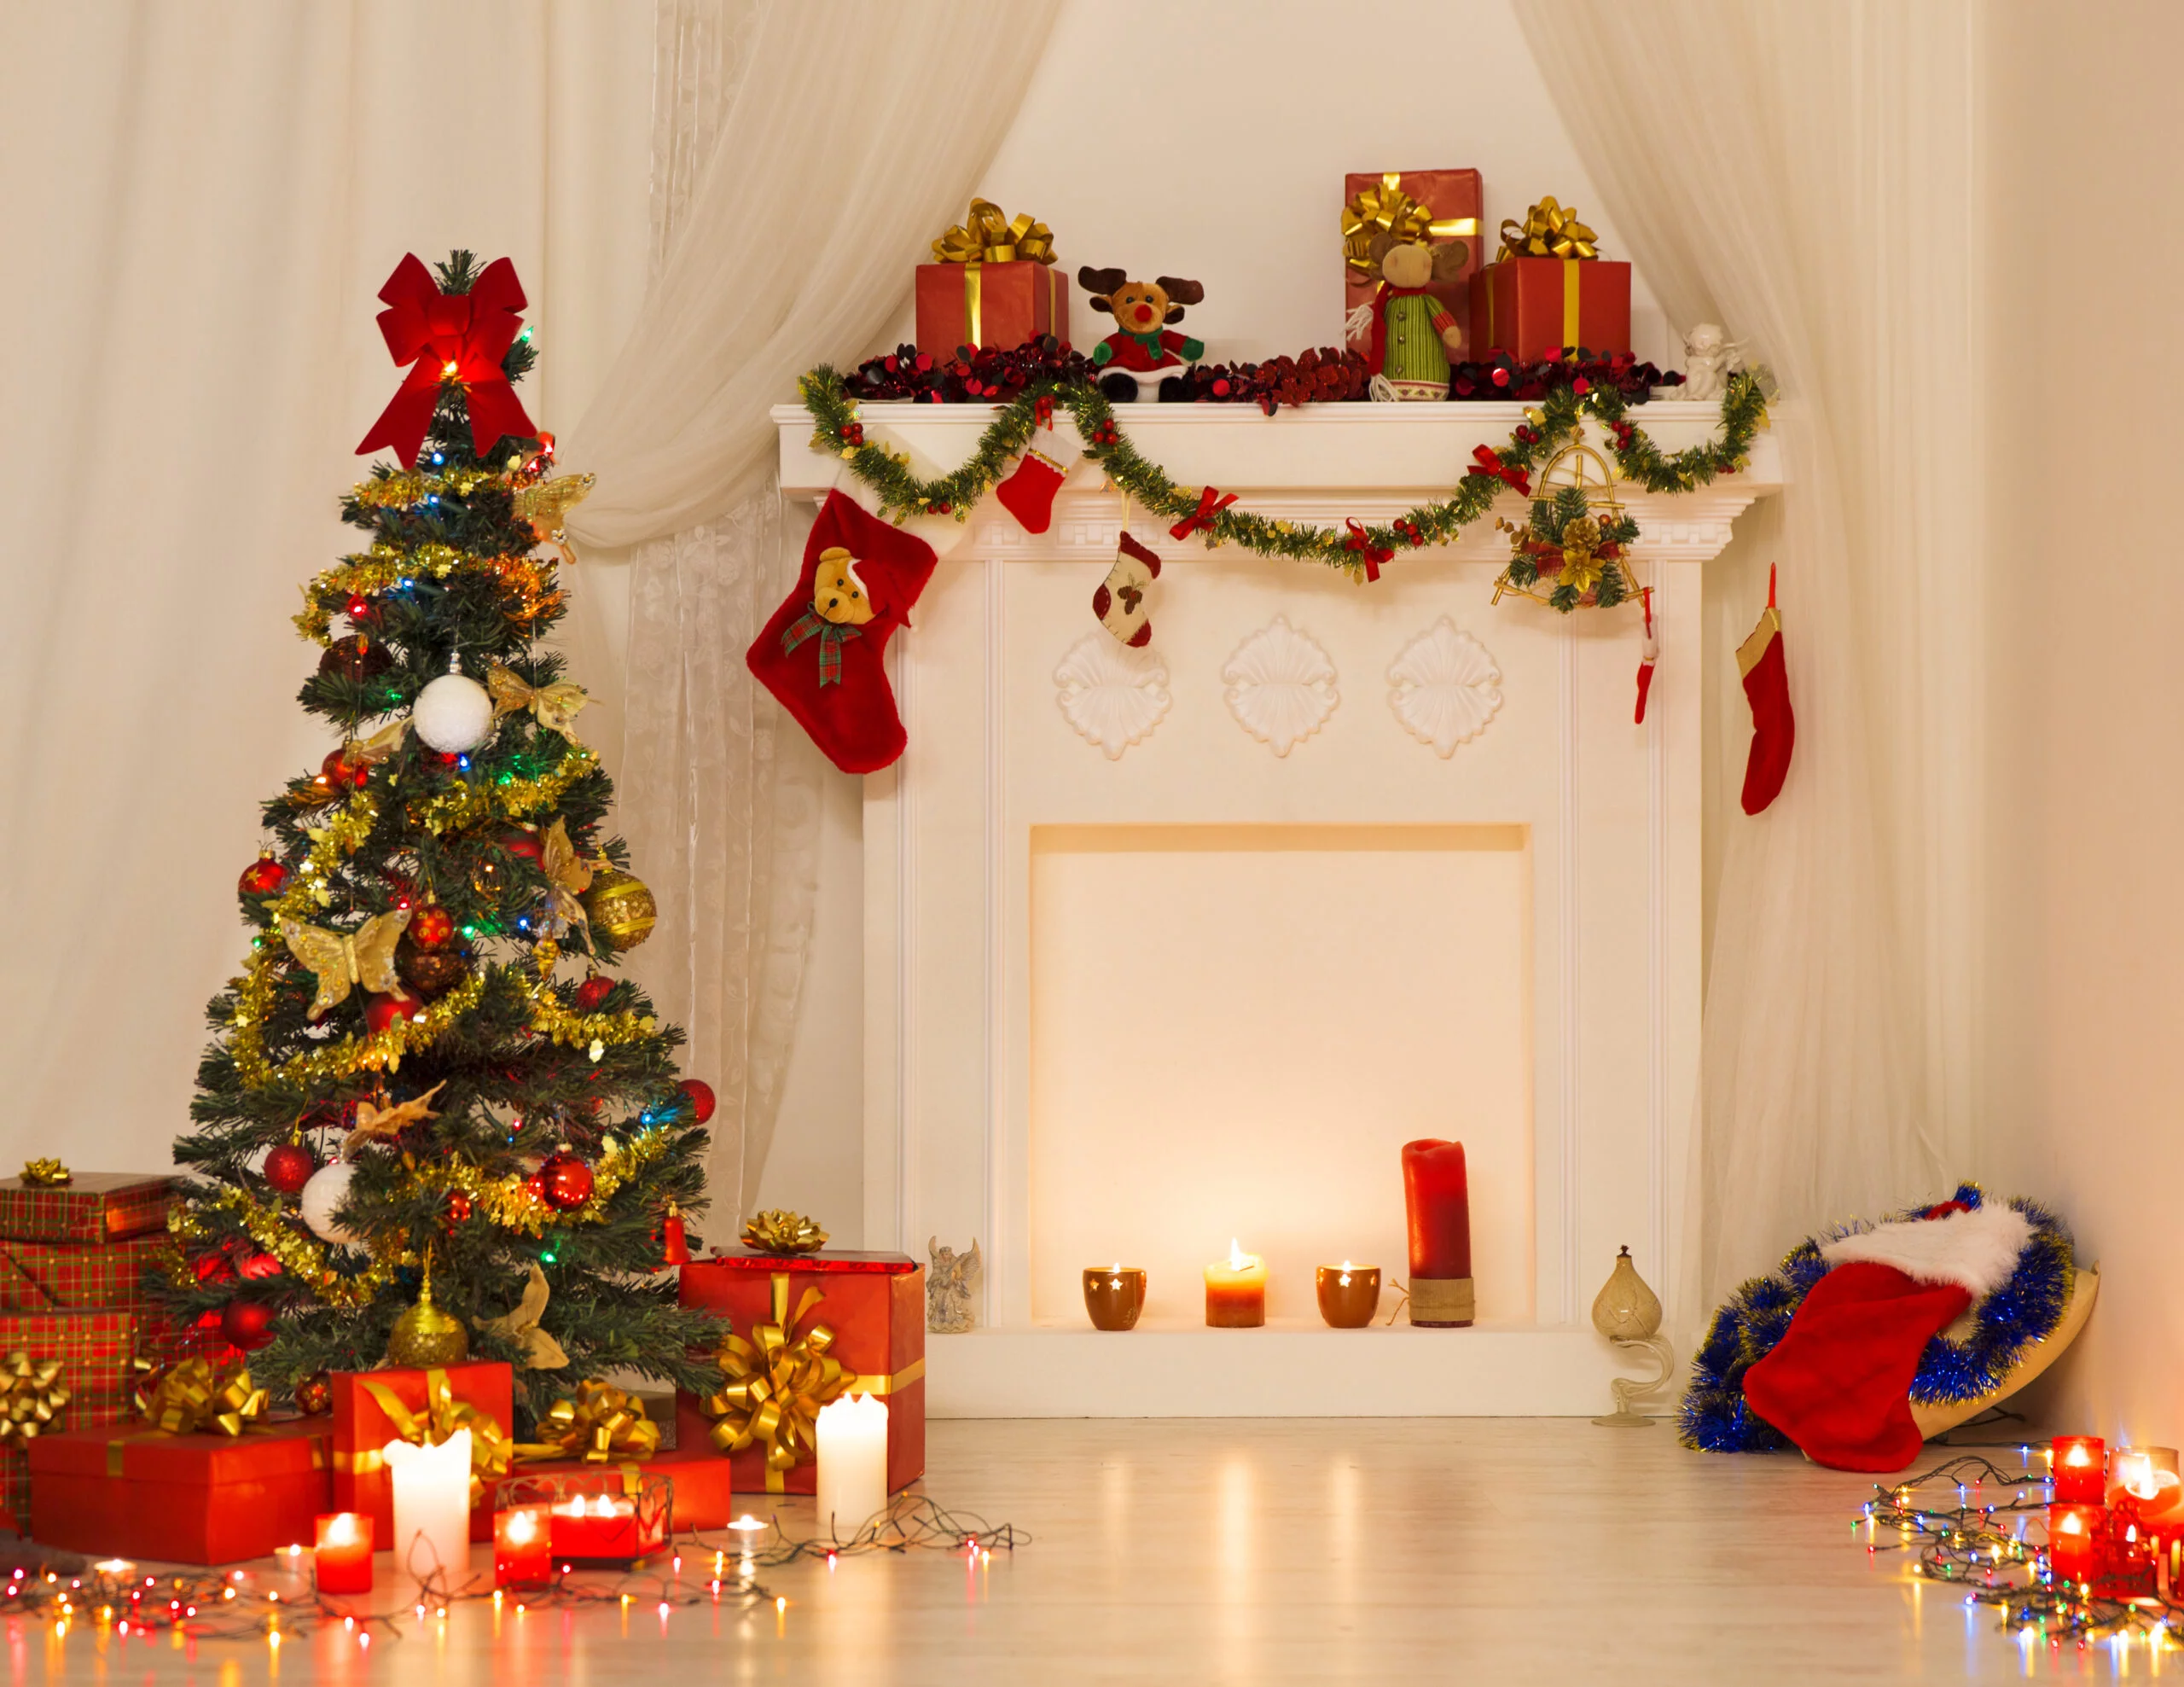 Christmas Room Interior Design, Xmas Tree Decorated By Lights Presents Gifts Toys, Fireplace and Candles Lighting Indoors